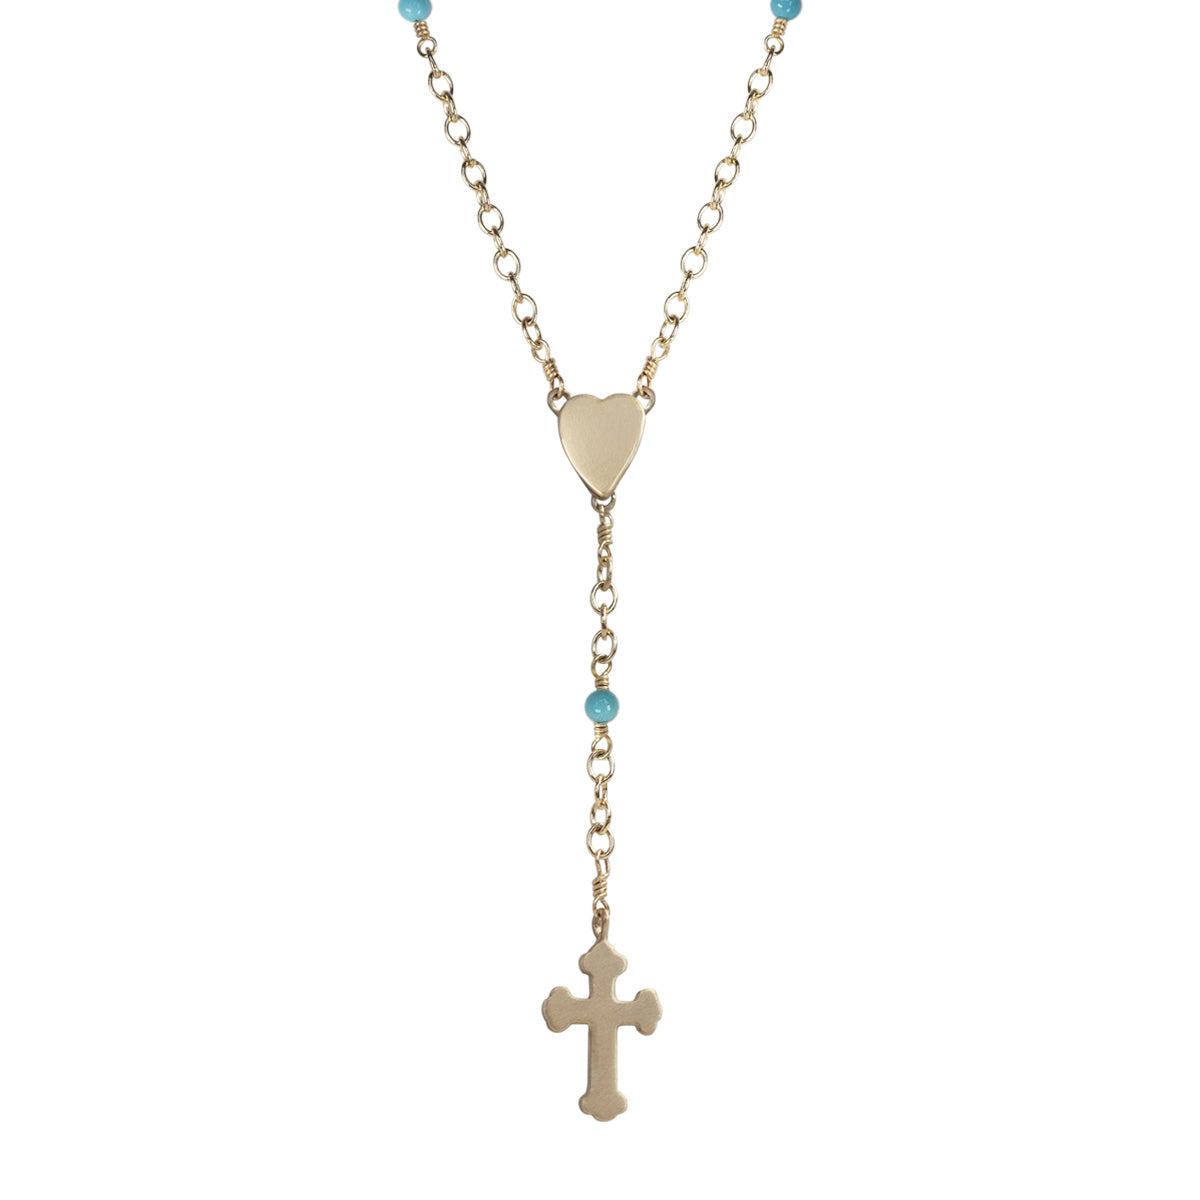 10K Gold Heart and Cross Rosary Necklace on Turquoise Chain